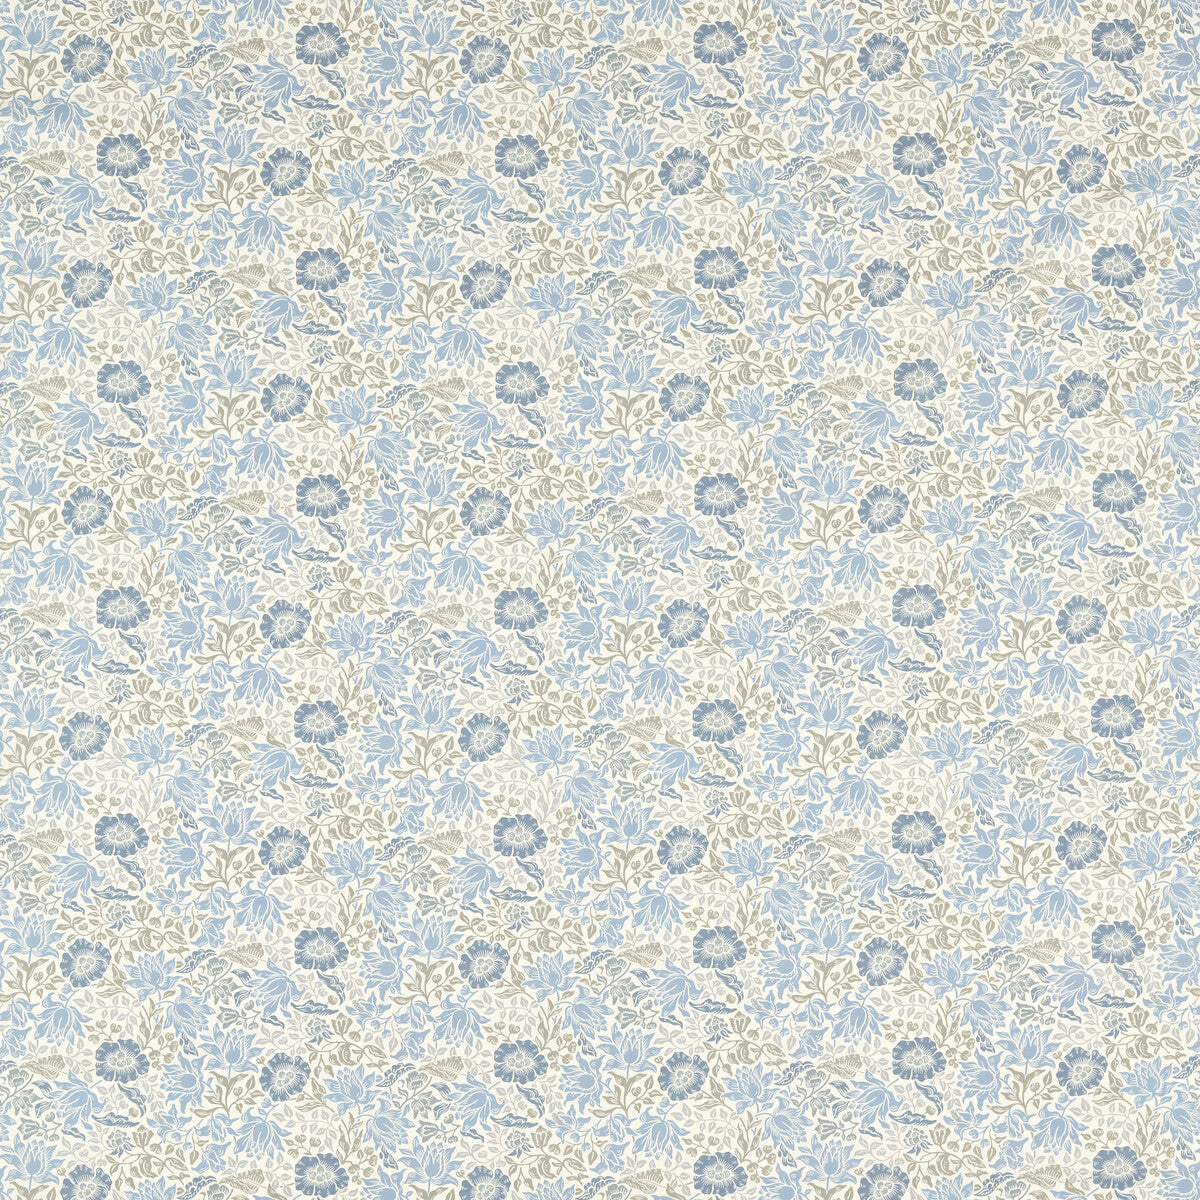 Mallow fabric in denim/ivory color - pattern F1680/03.CAC.0 - by Clarke And Clarke in the Clarke &amp; Clarke William Morris Designs collection